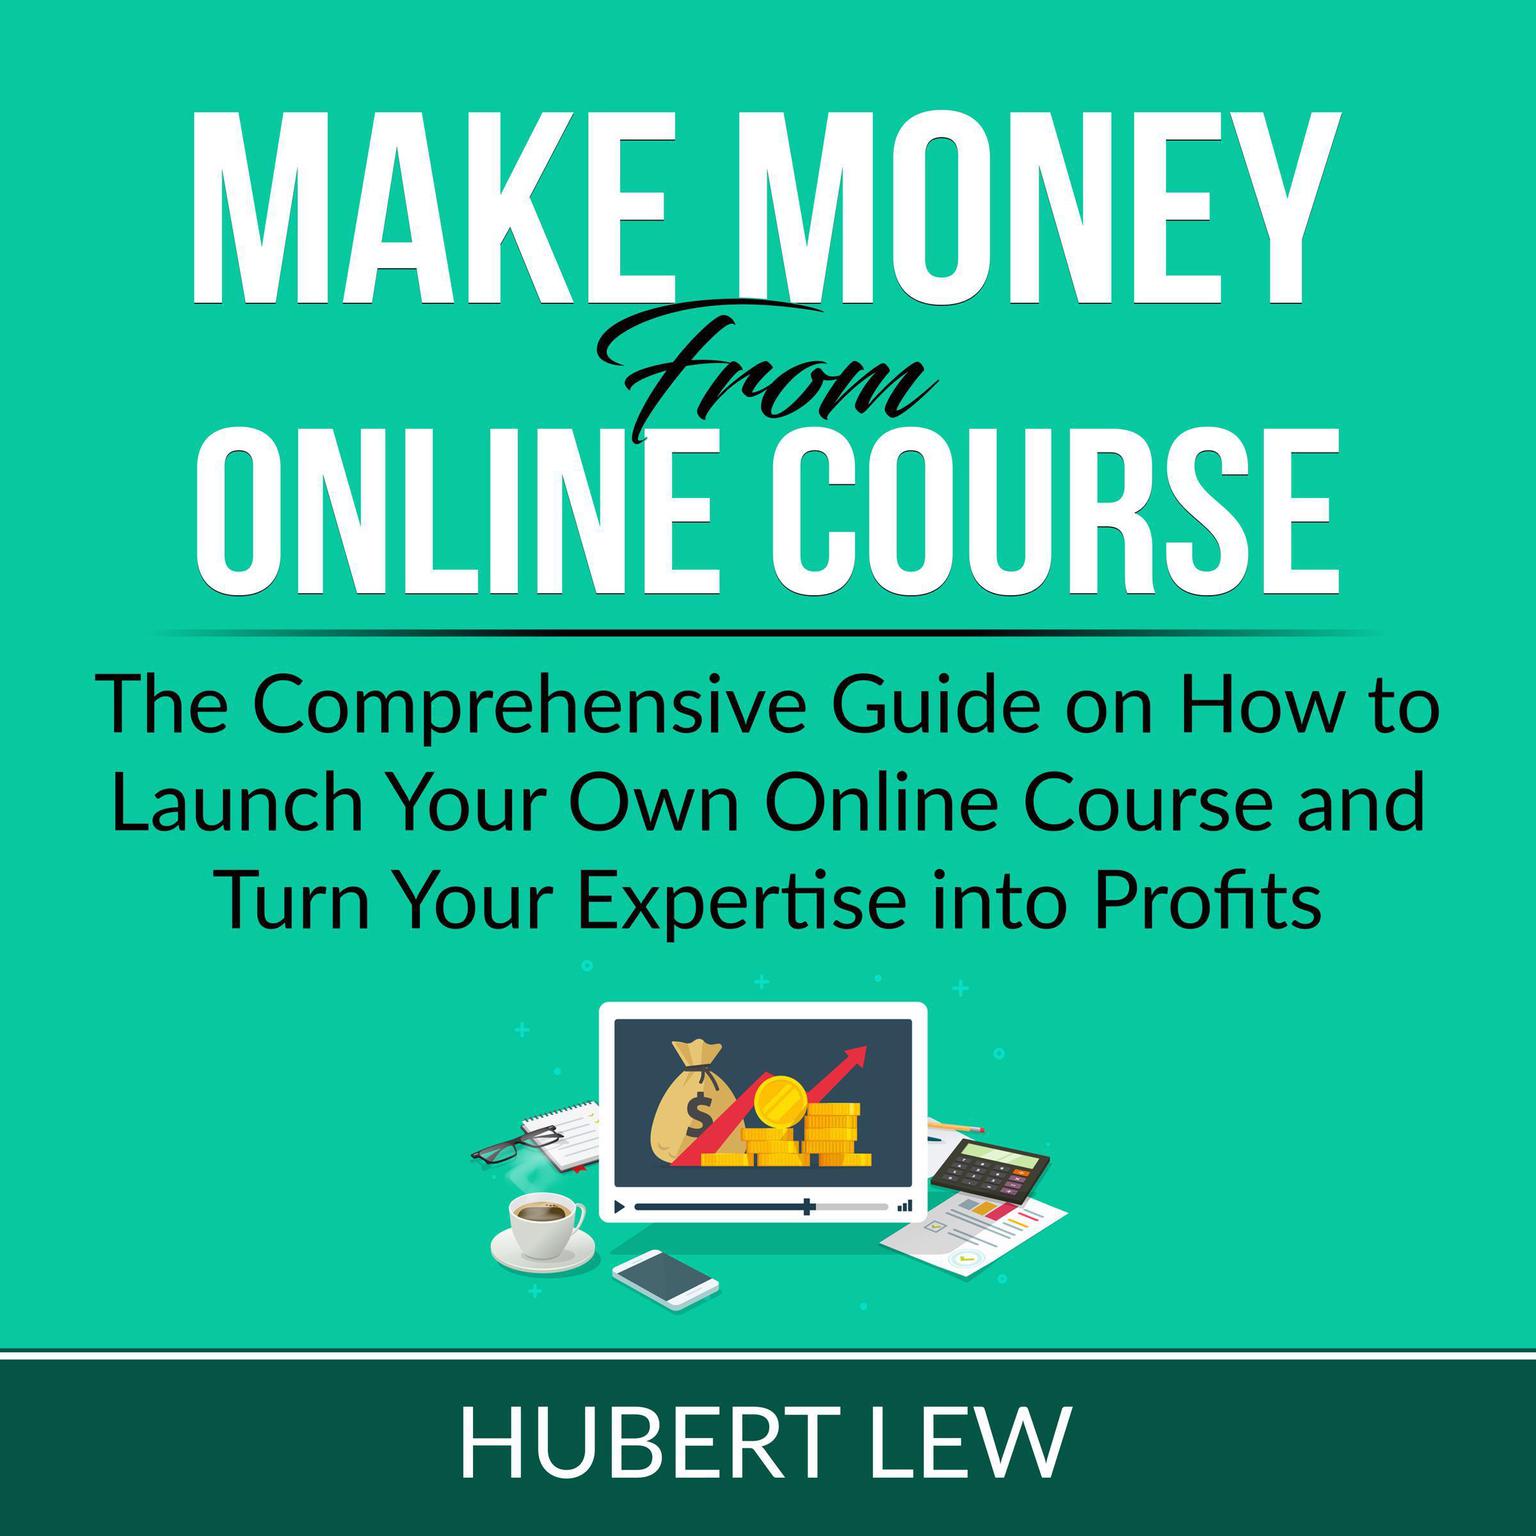 Make Money From Online Course: The Comprehensive Guide on How to Launch Your Own Online Course and Turn Your Expertise into Profits Audiobook, by Hubert Lew